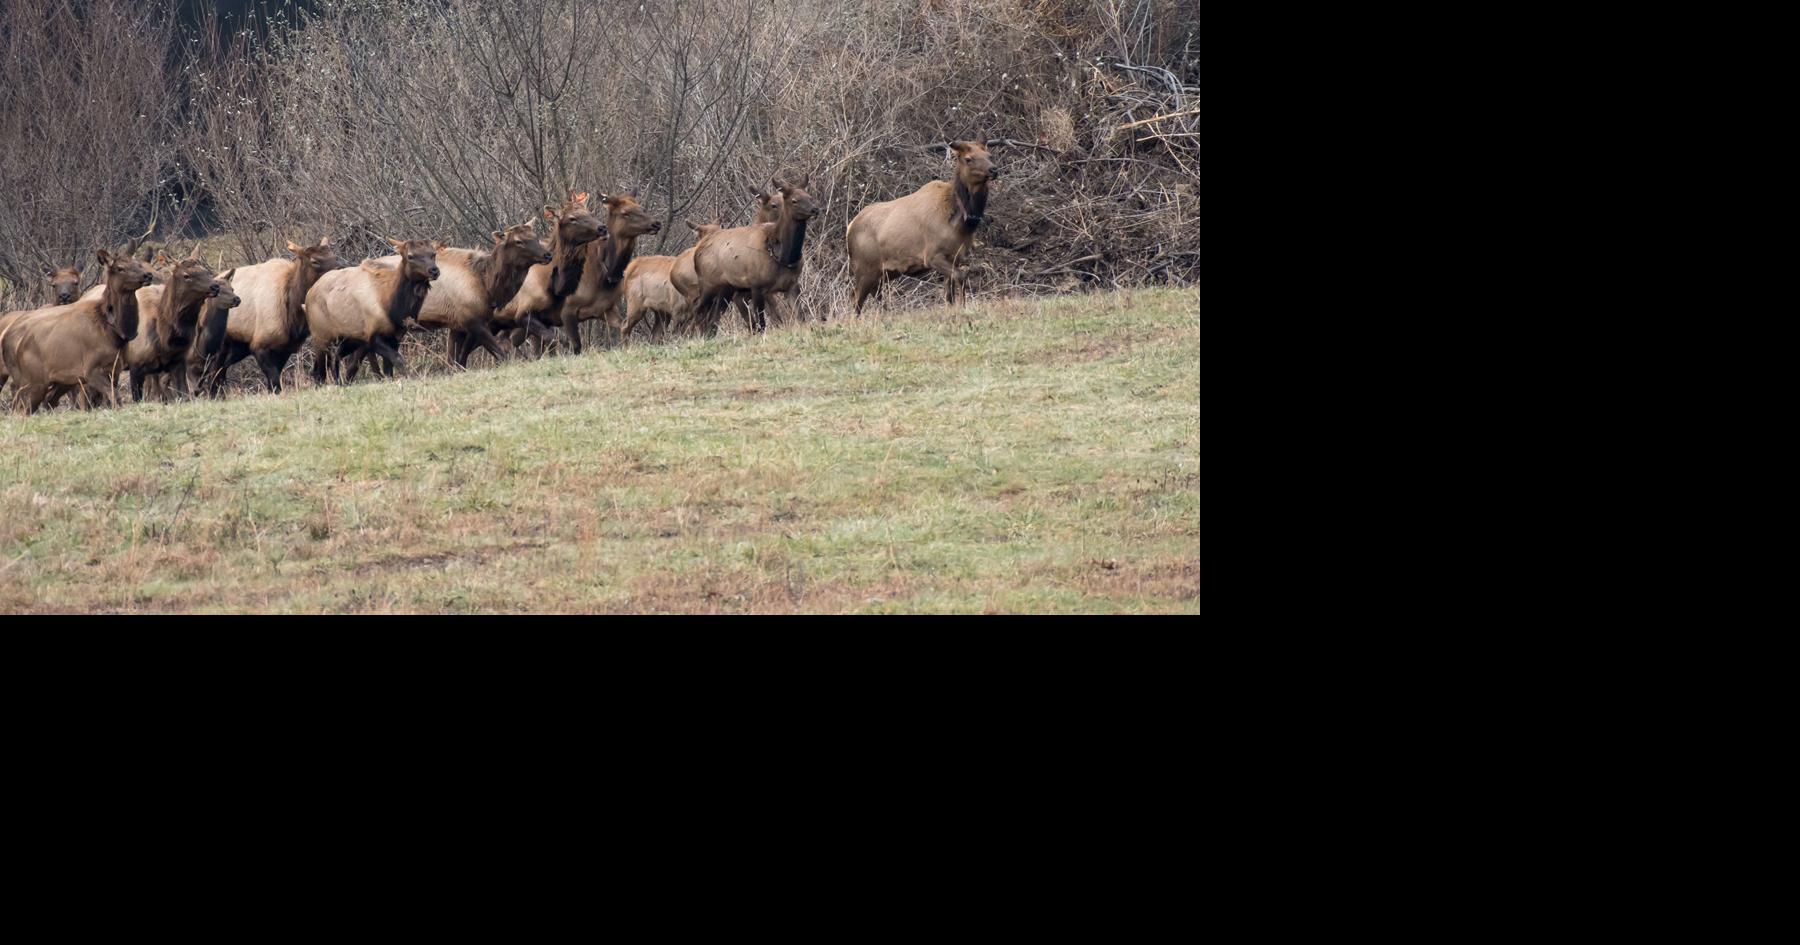 Maggie Susa: An inside look at a West Virginia elk tour